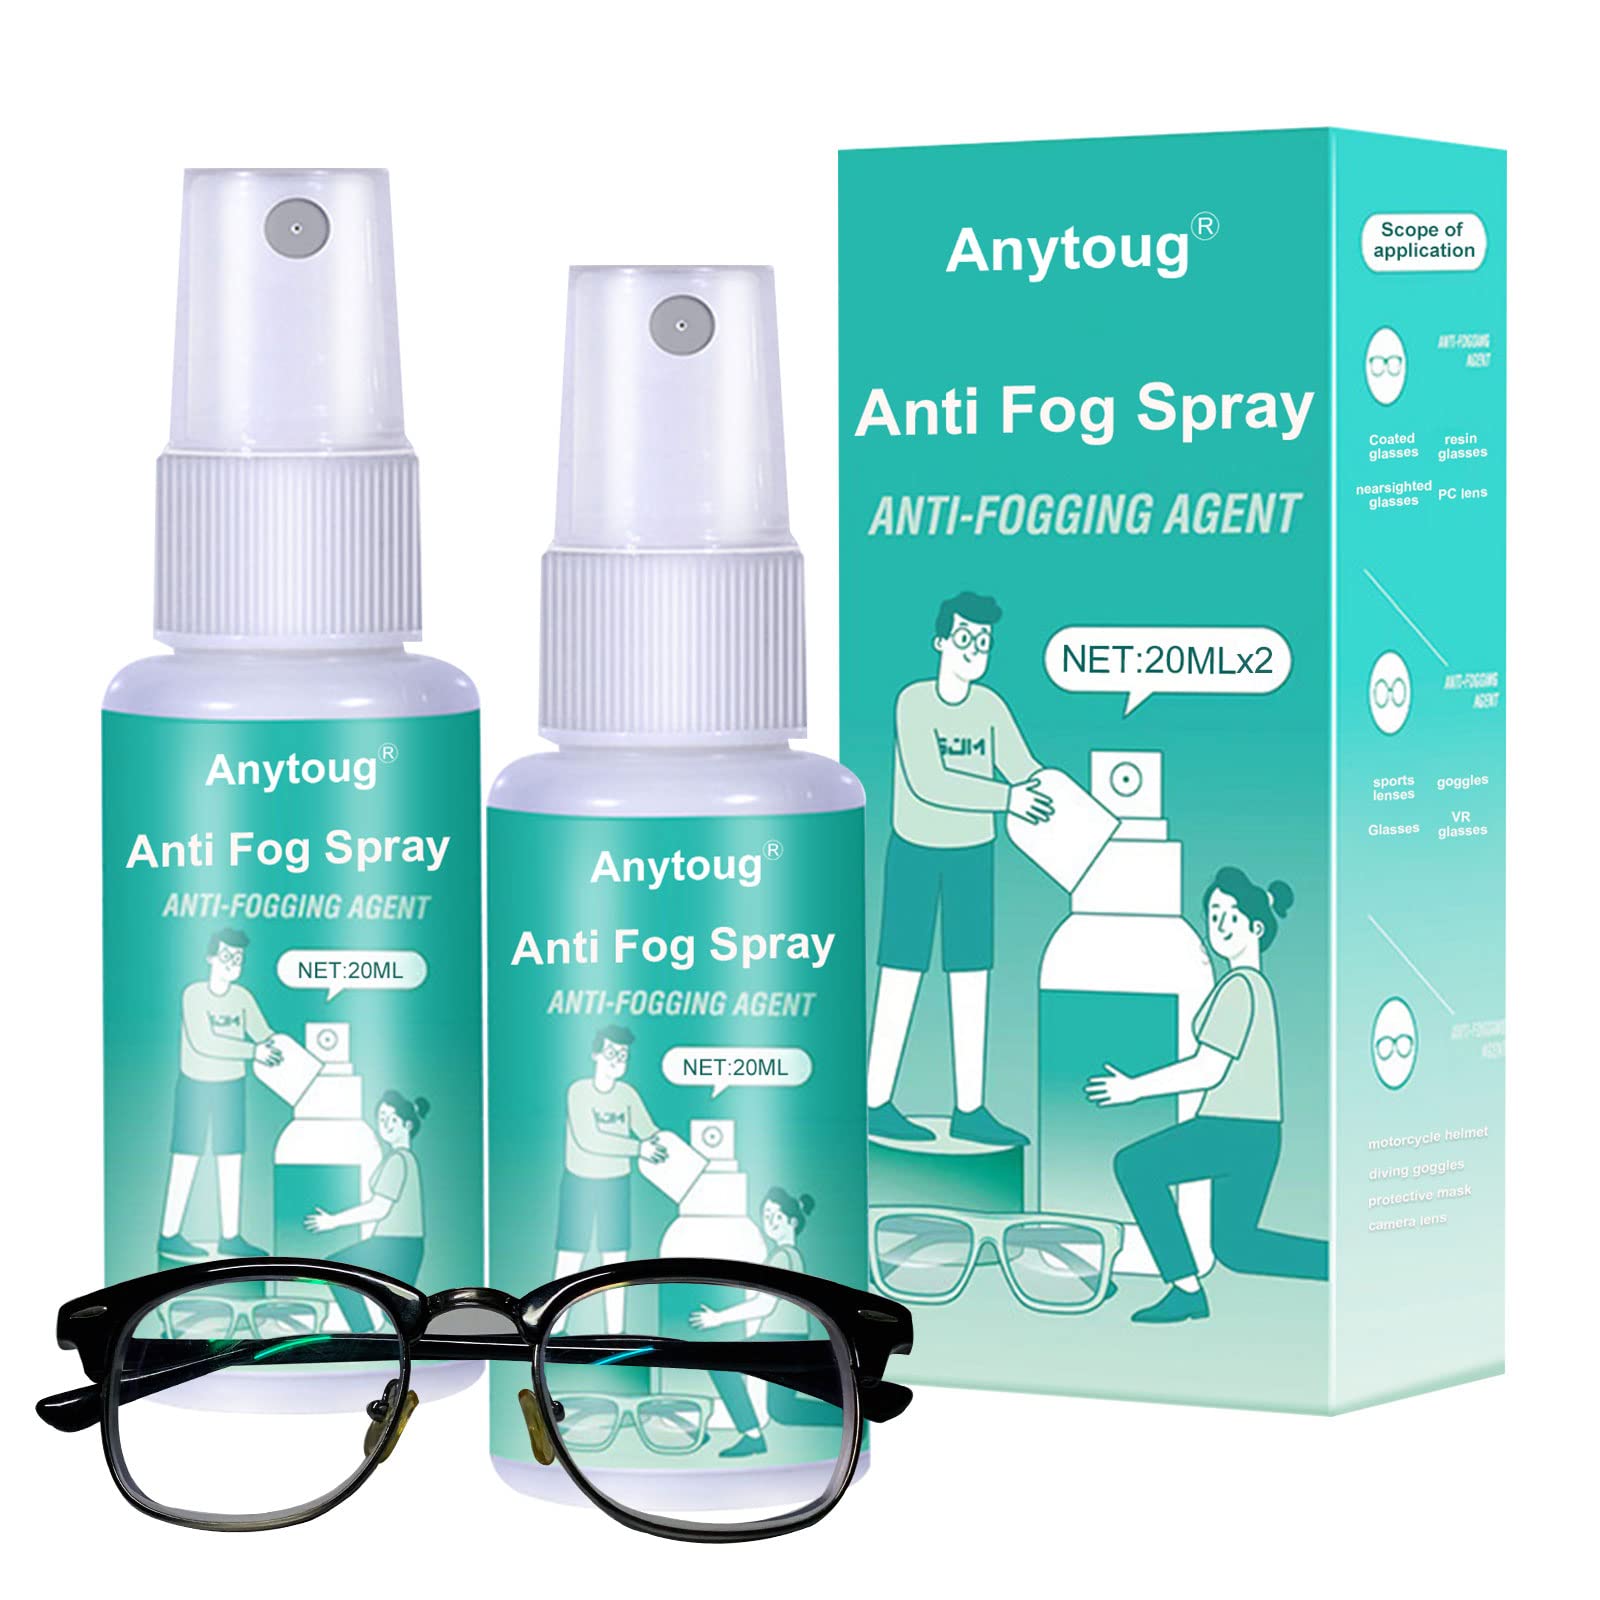 Crystal Clear Vision: Car Anti-fog Wipes For Windshield Defogging And Glass  Cleaning